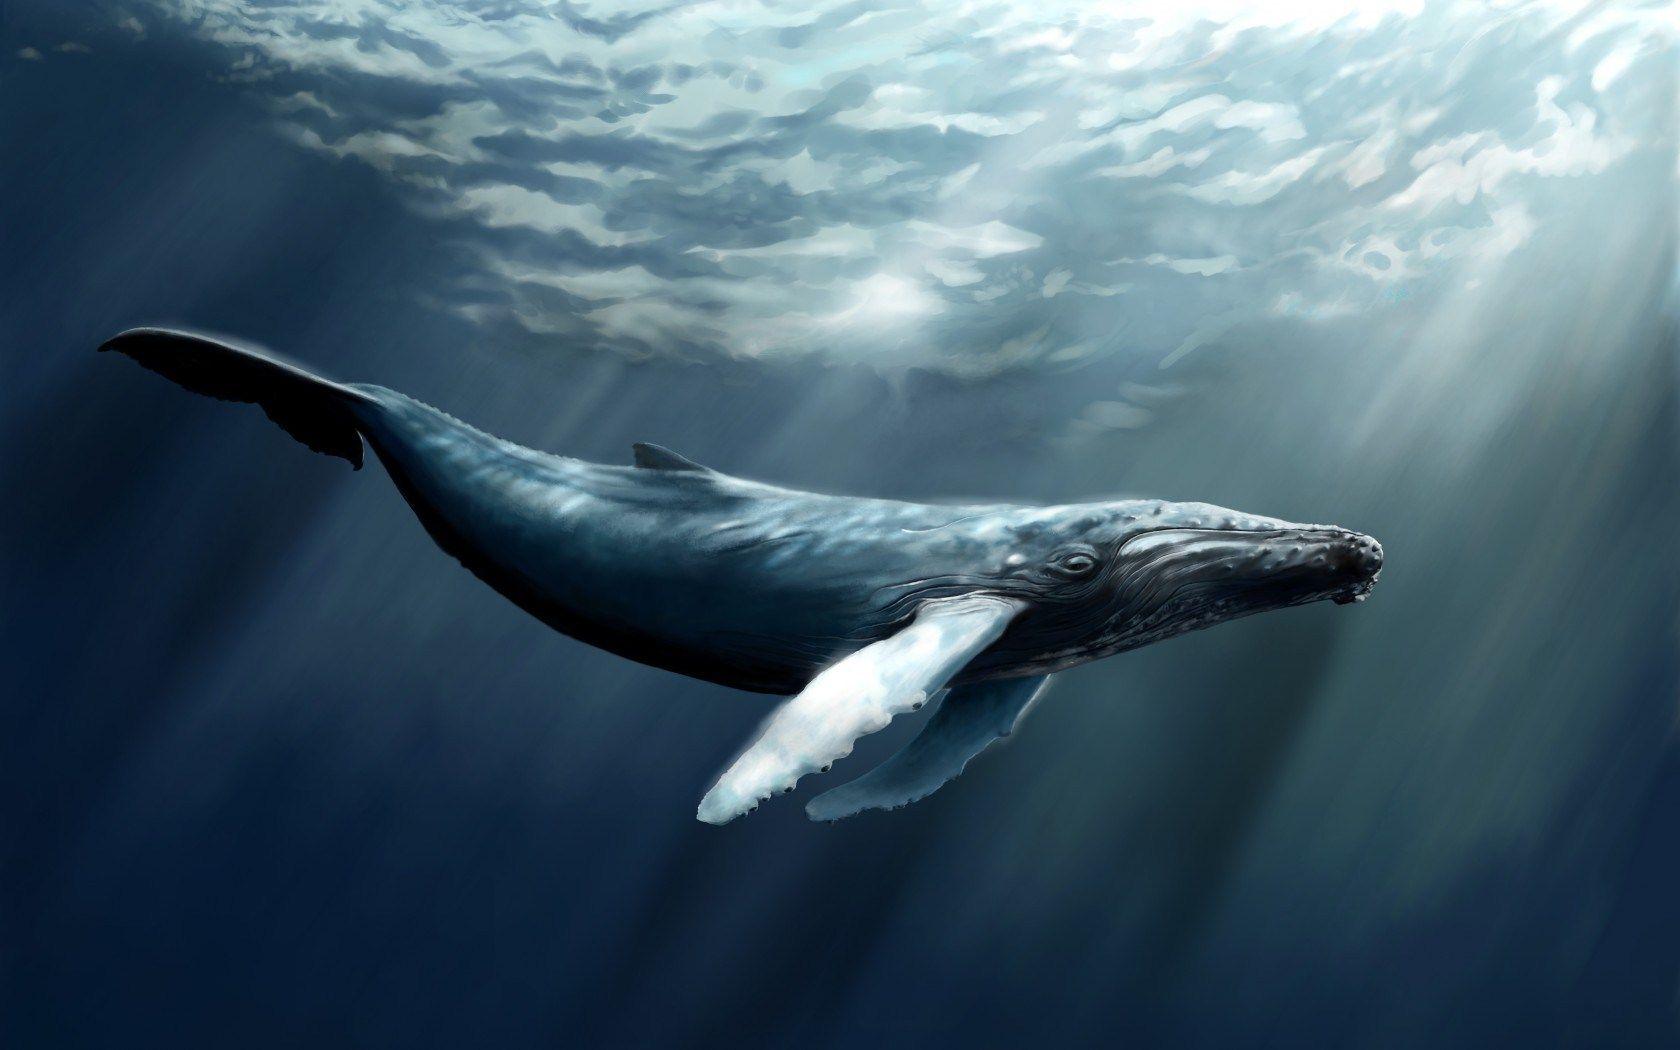 Some bowhead whales alive today are over 200 years old.13